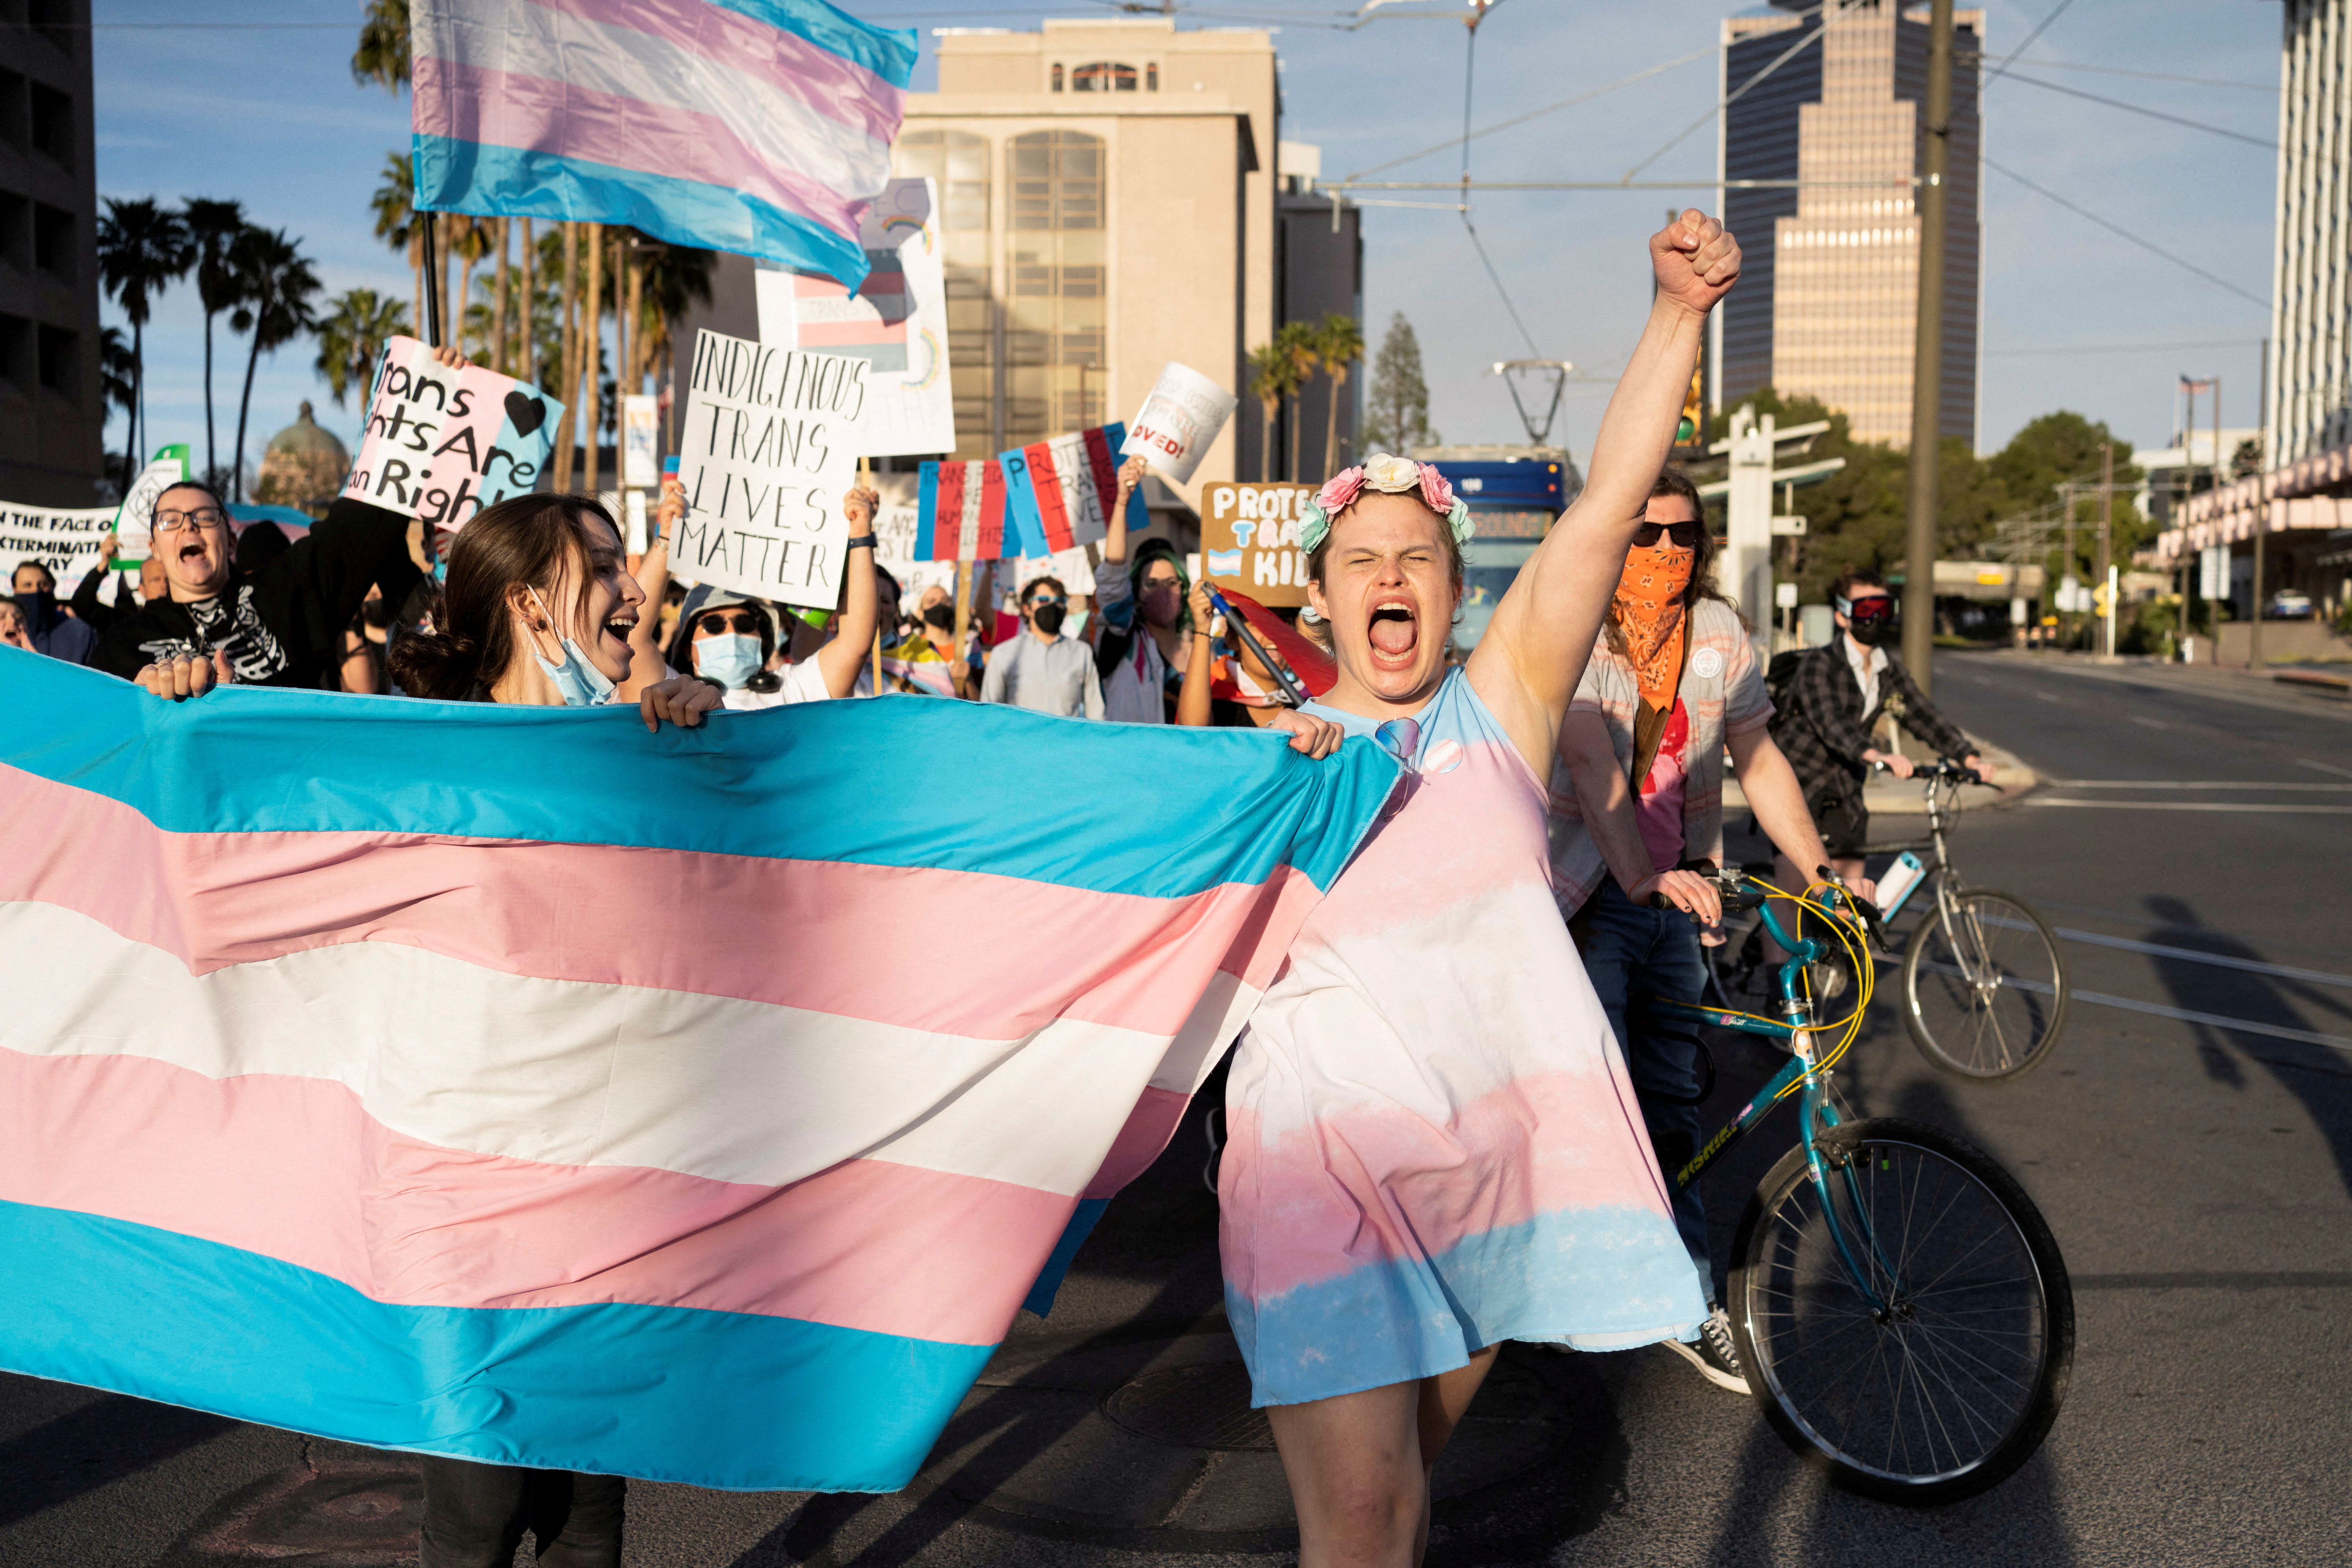 International Transgender Day of Visibility rally and protest in Tucson